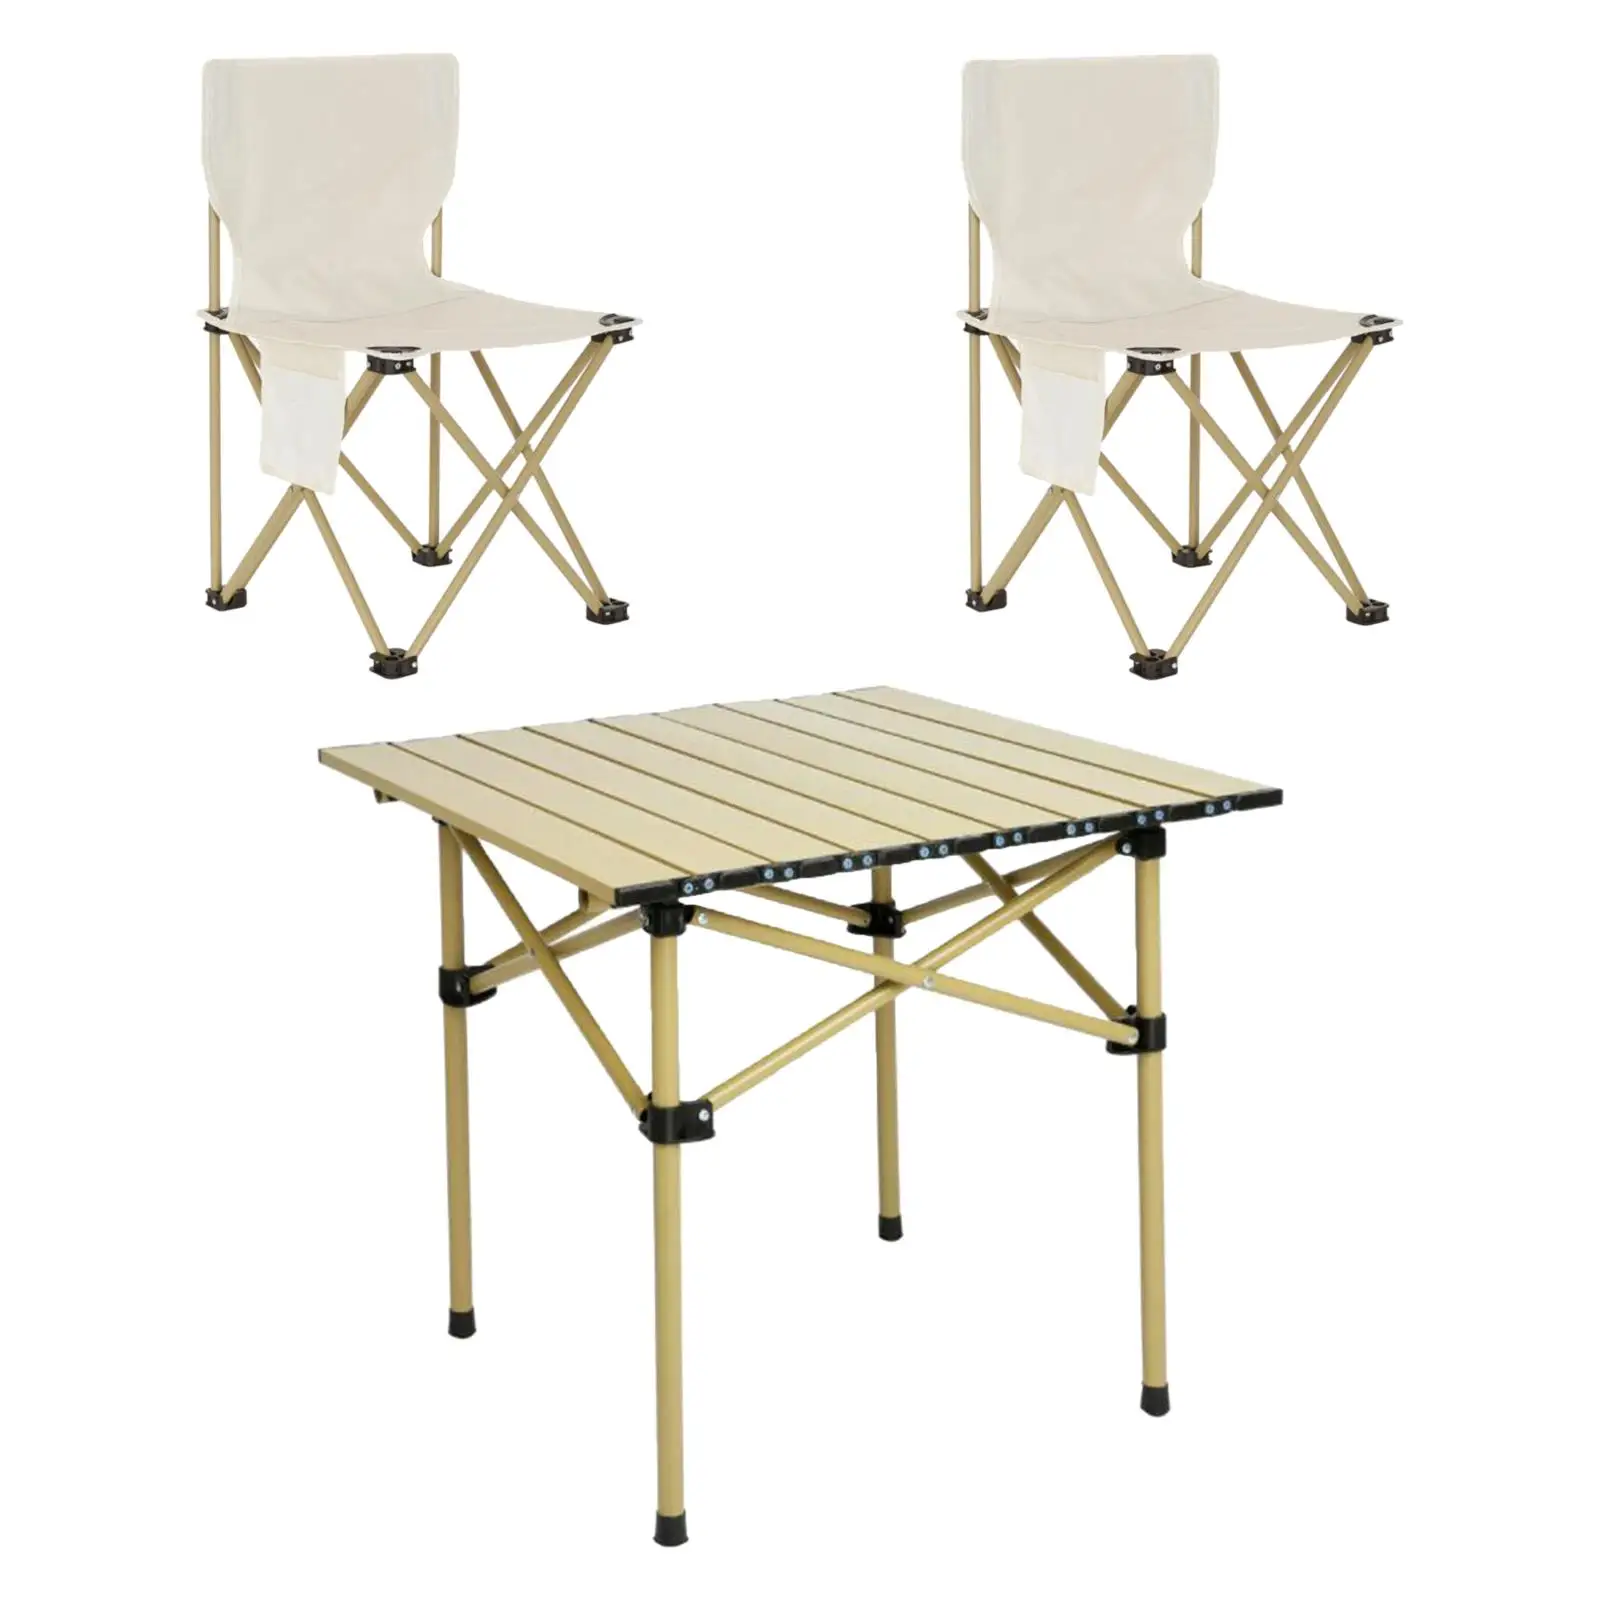 Camping Folding Table Chairs Set Beach Steel Table Lightweight Portable Side Table for Deck Outdoor Fishing Hiking Picnic